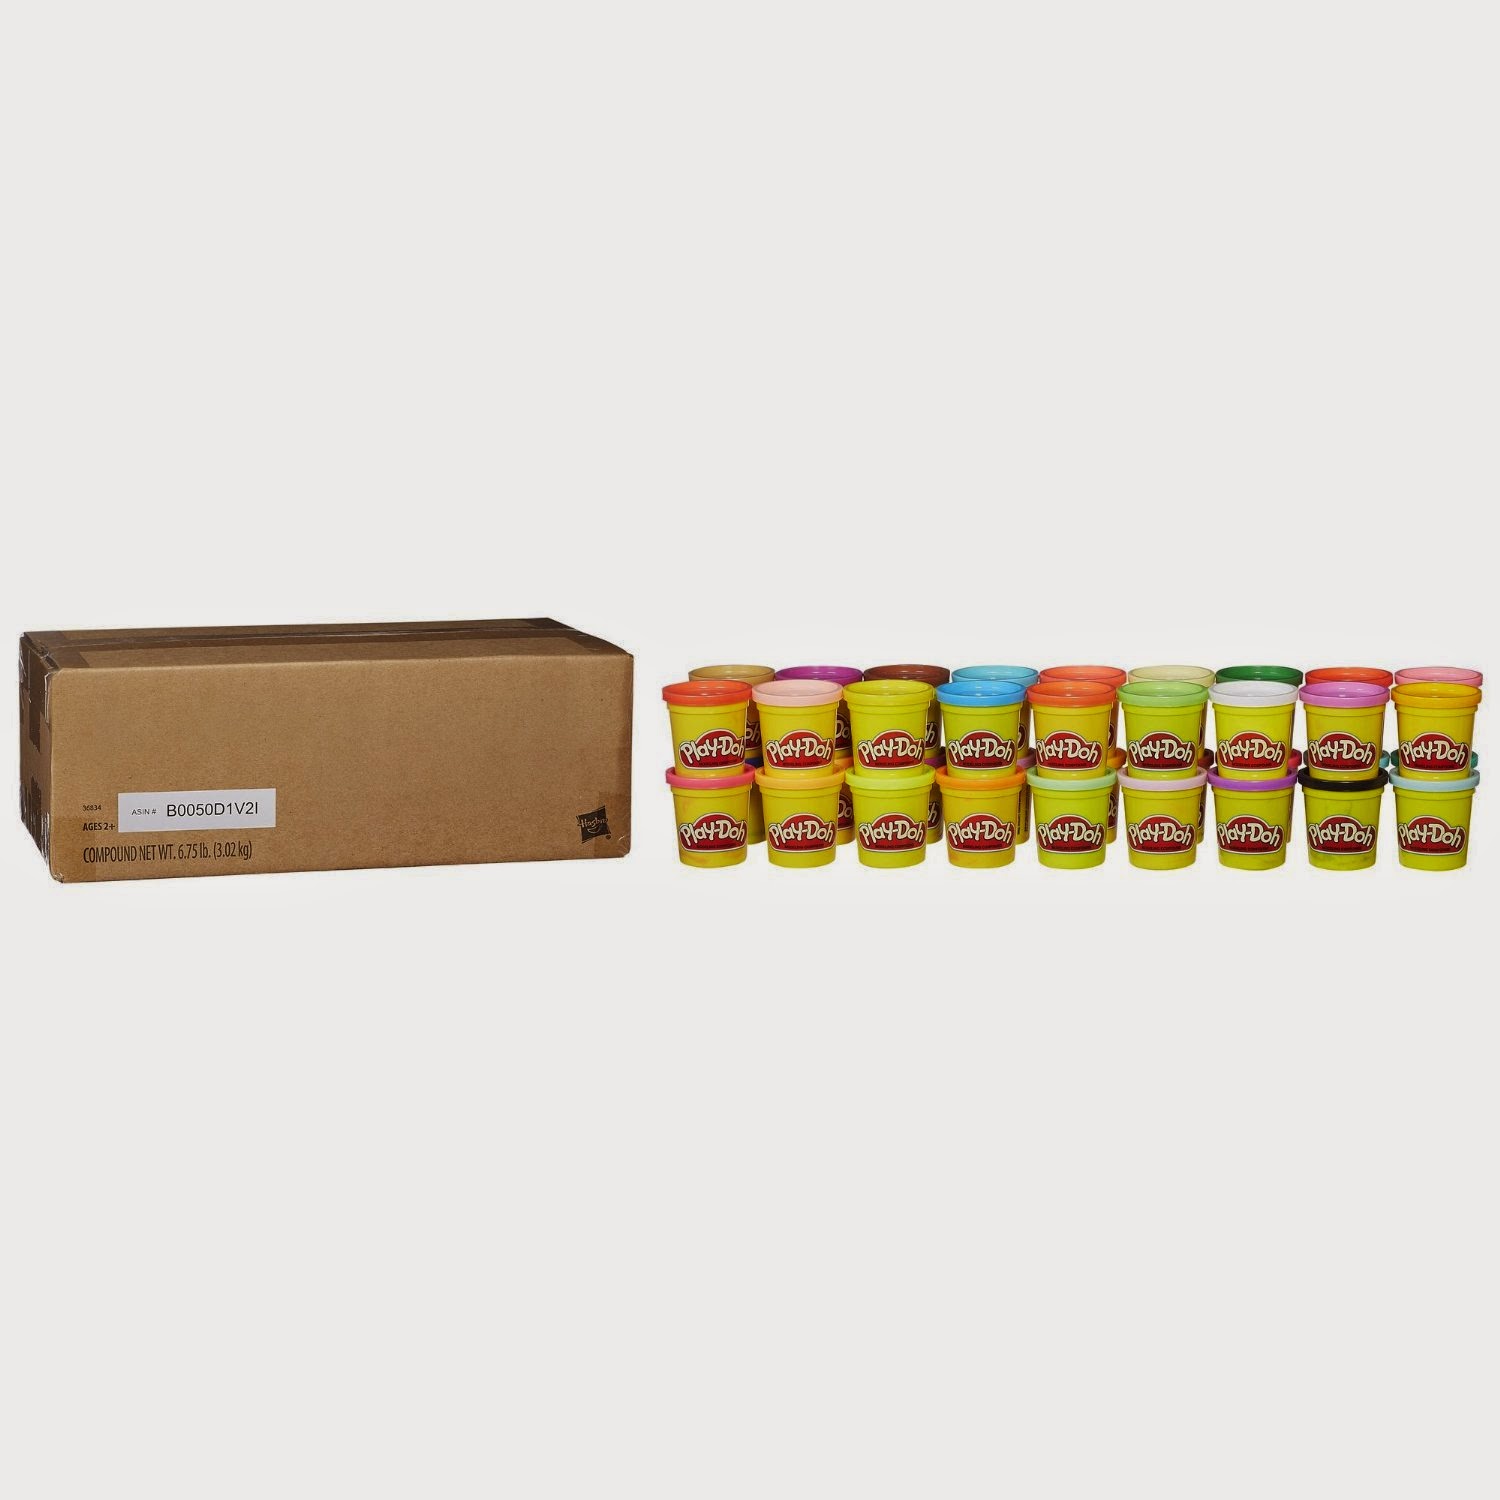 Play Doh Mega Pack (36 Cans)